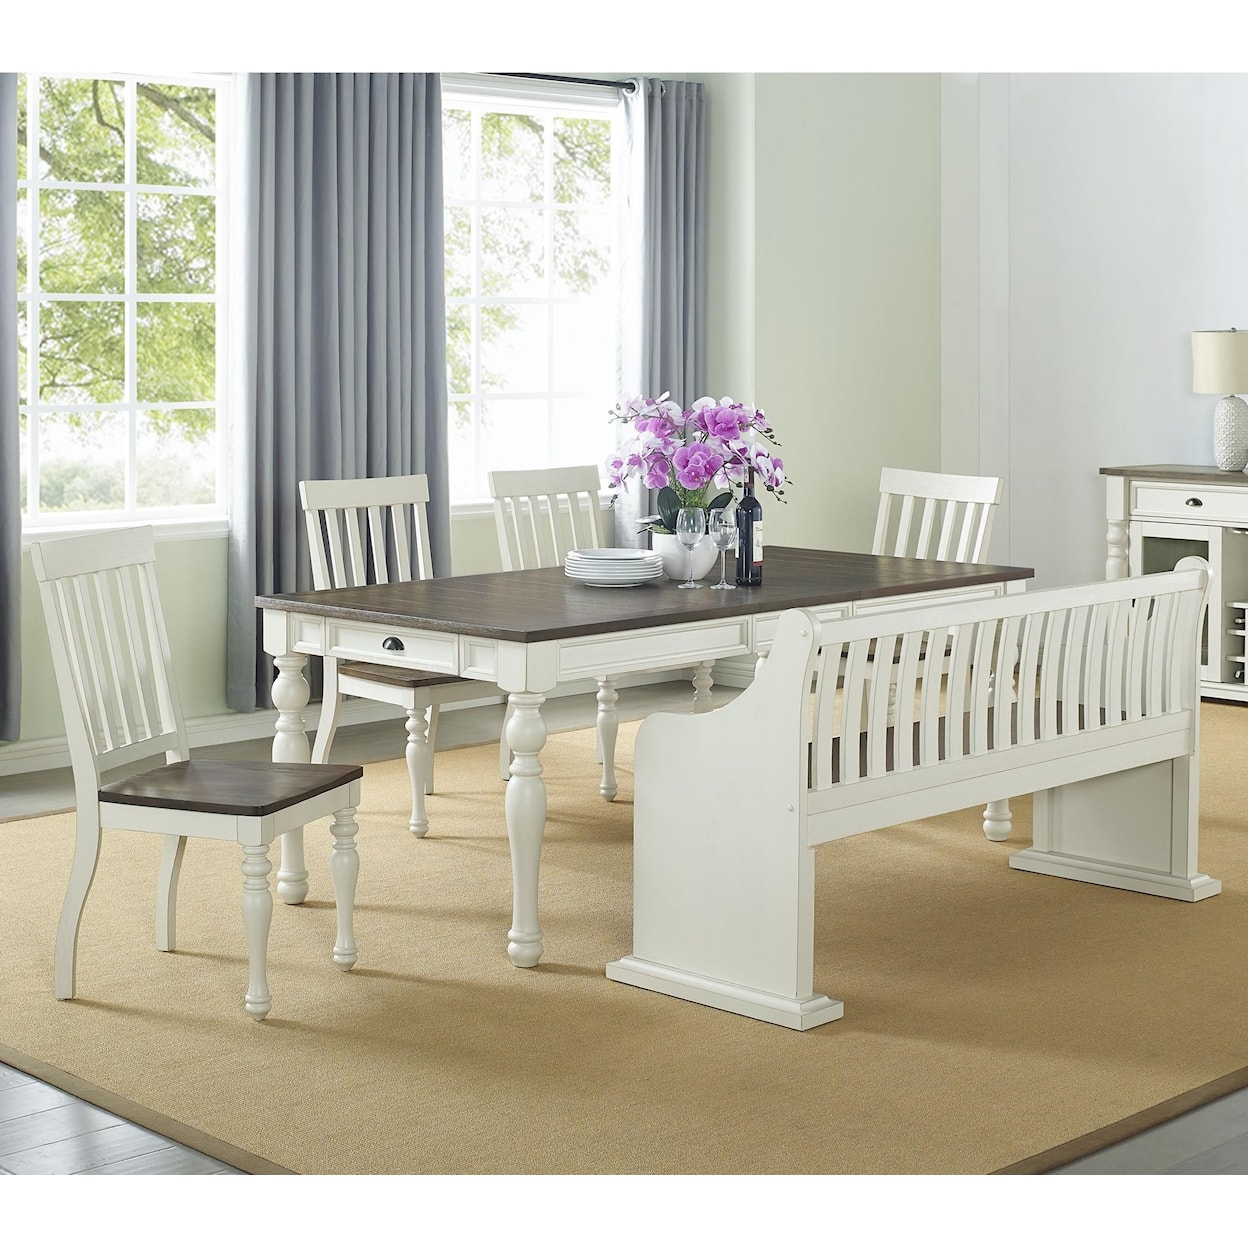 Steve Silver Joanna Dining Set with Bench with Back